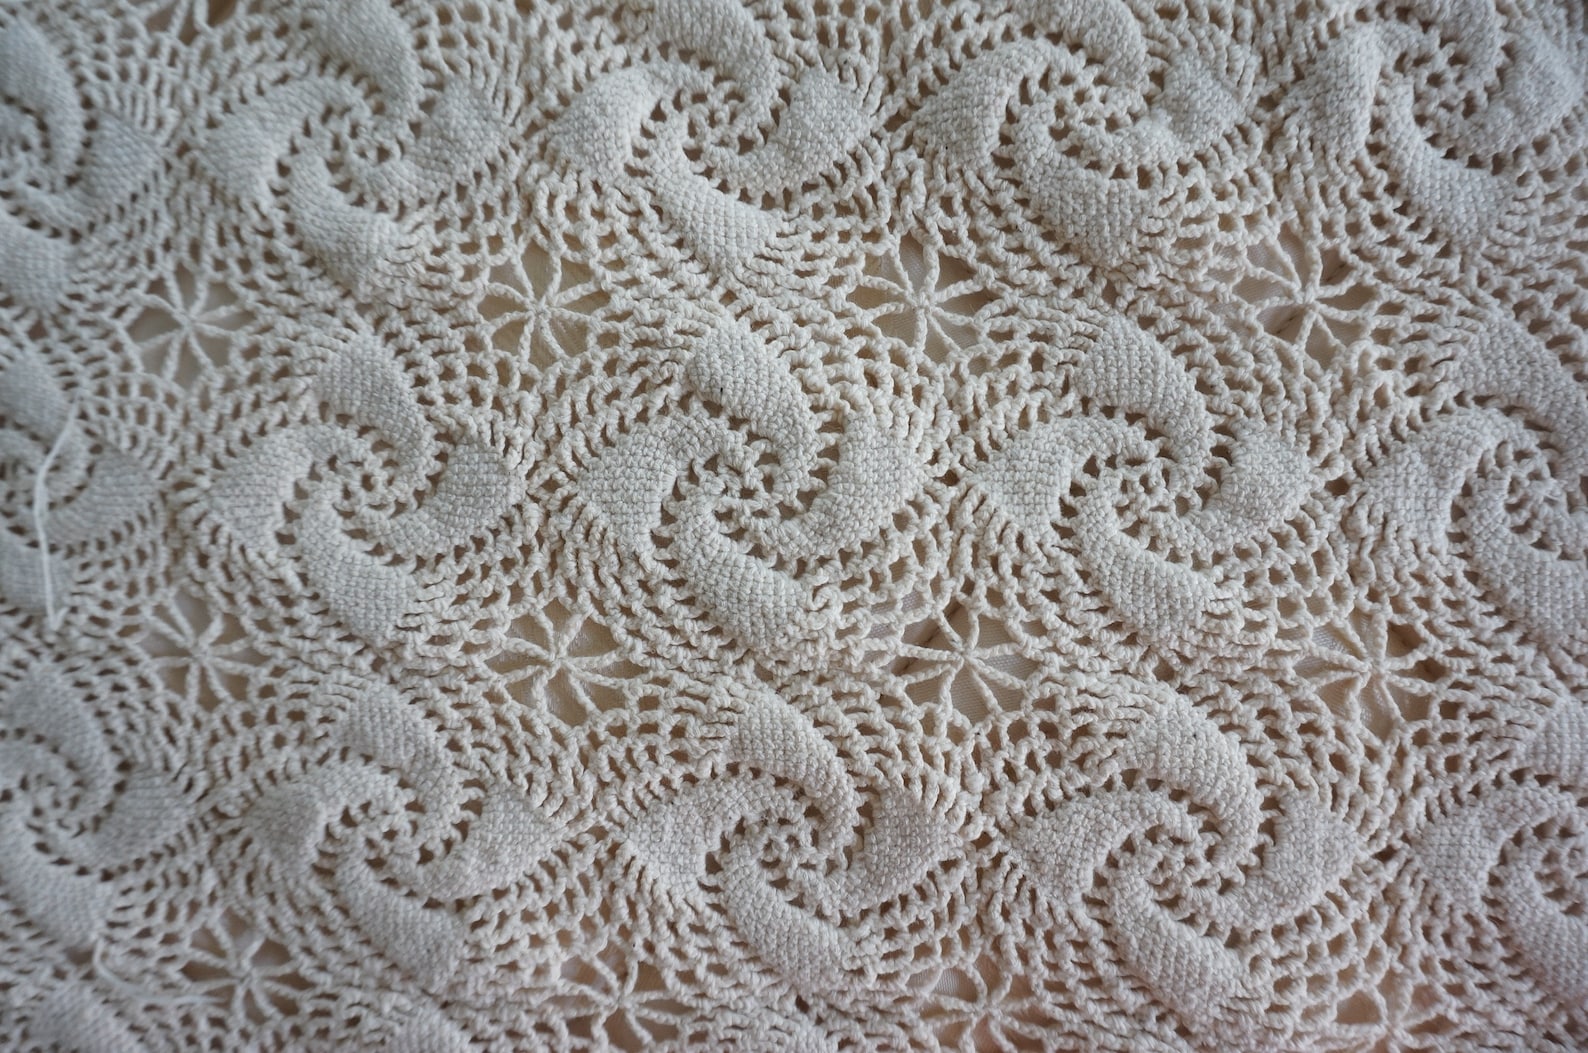 Early Fine Vintage Handmade Crochet Lace Bed Cover Coverlet - Etsy